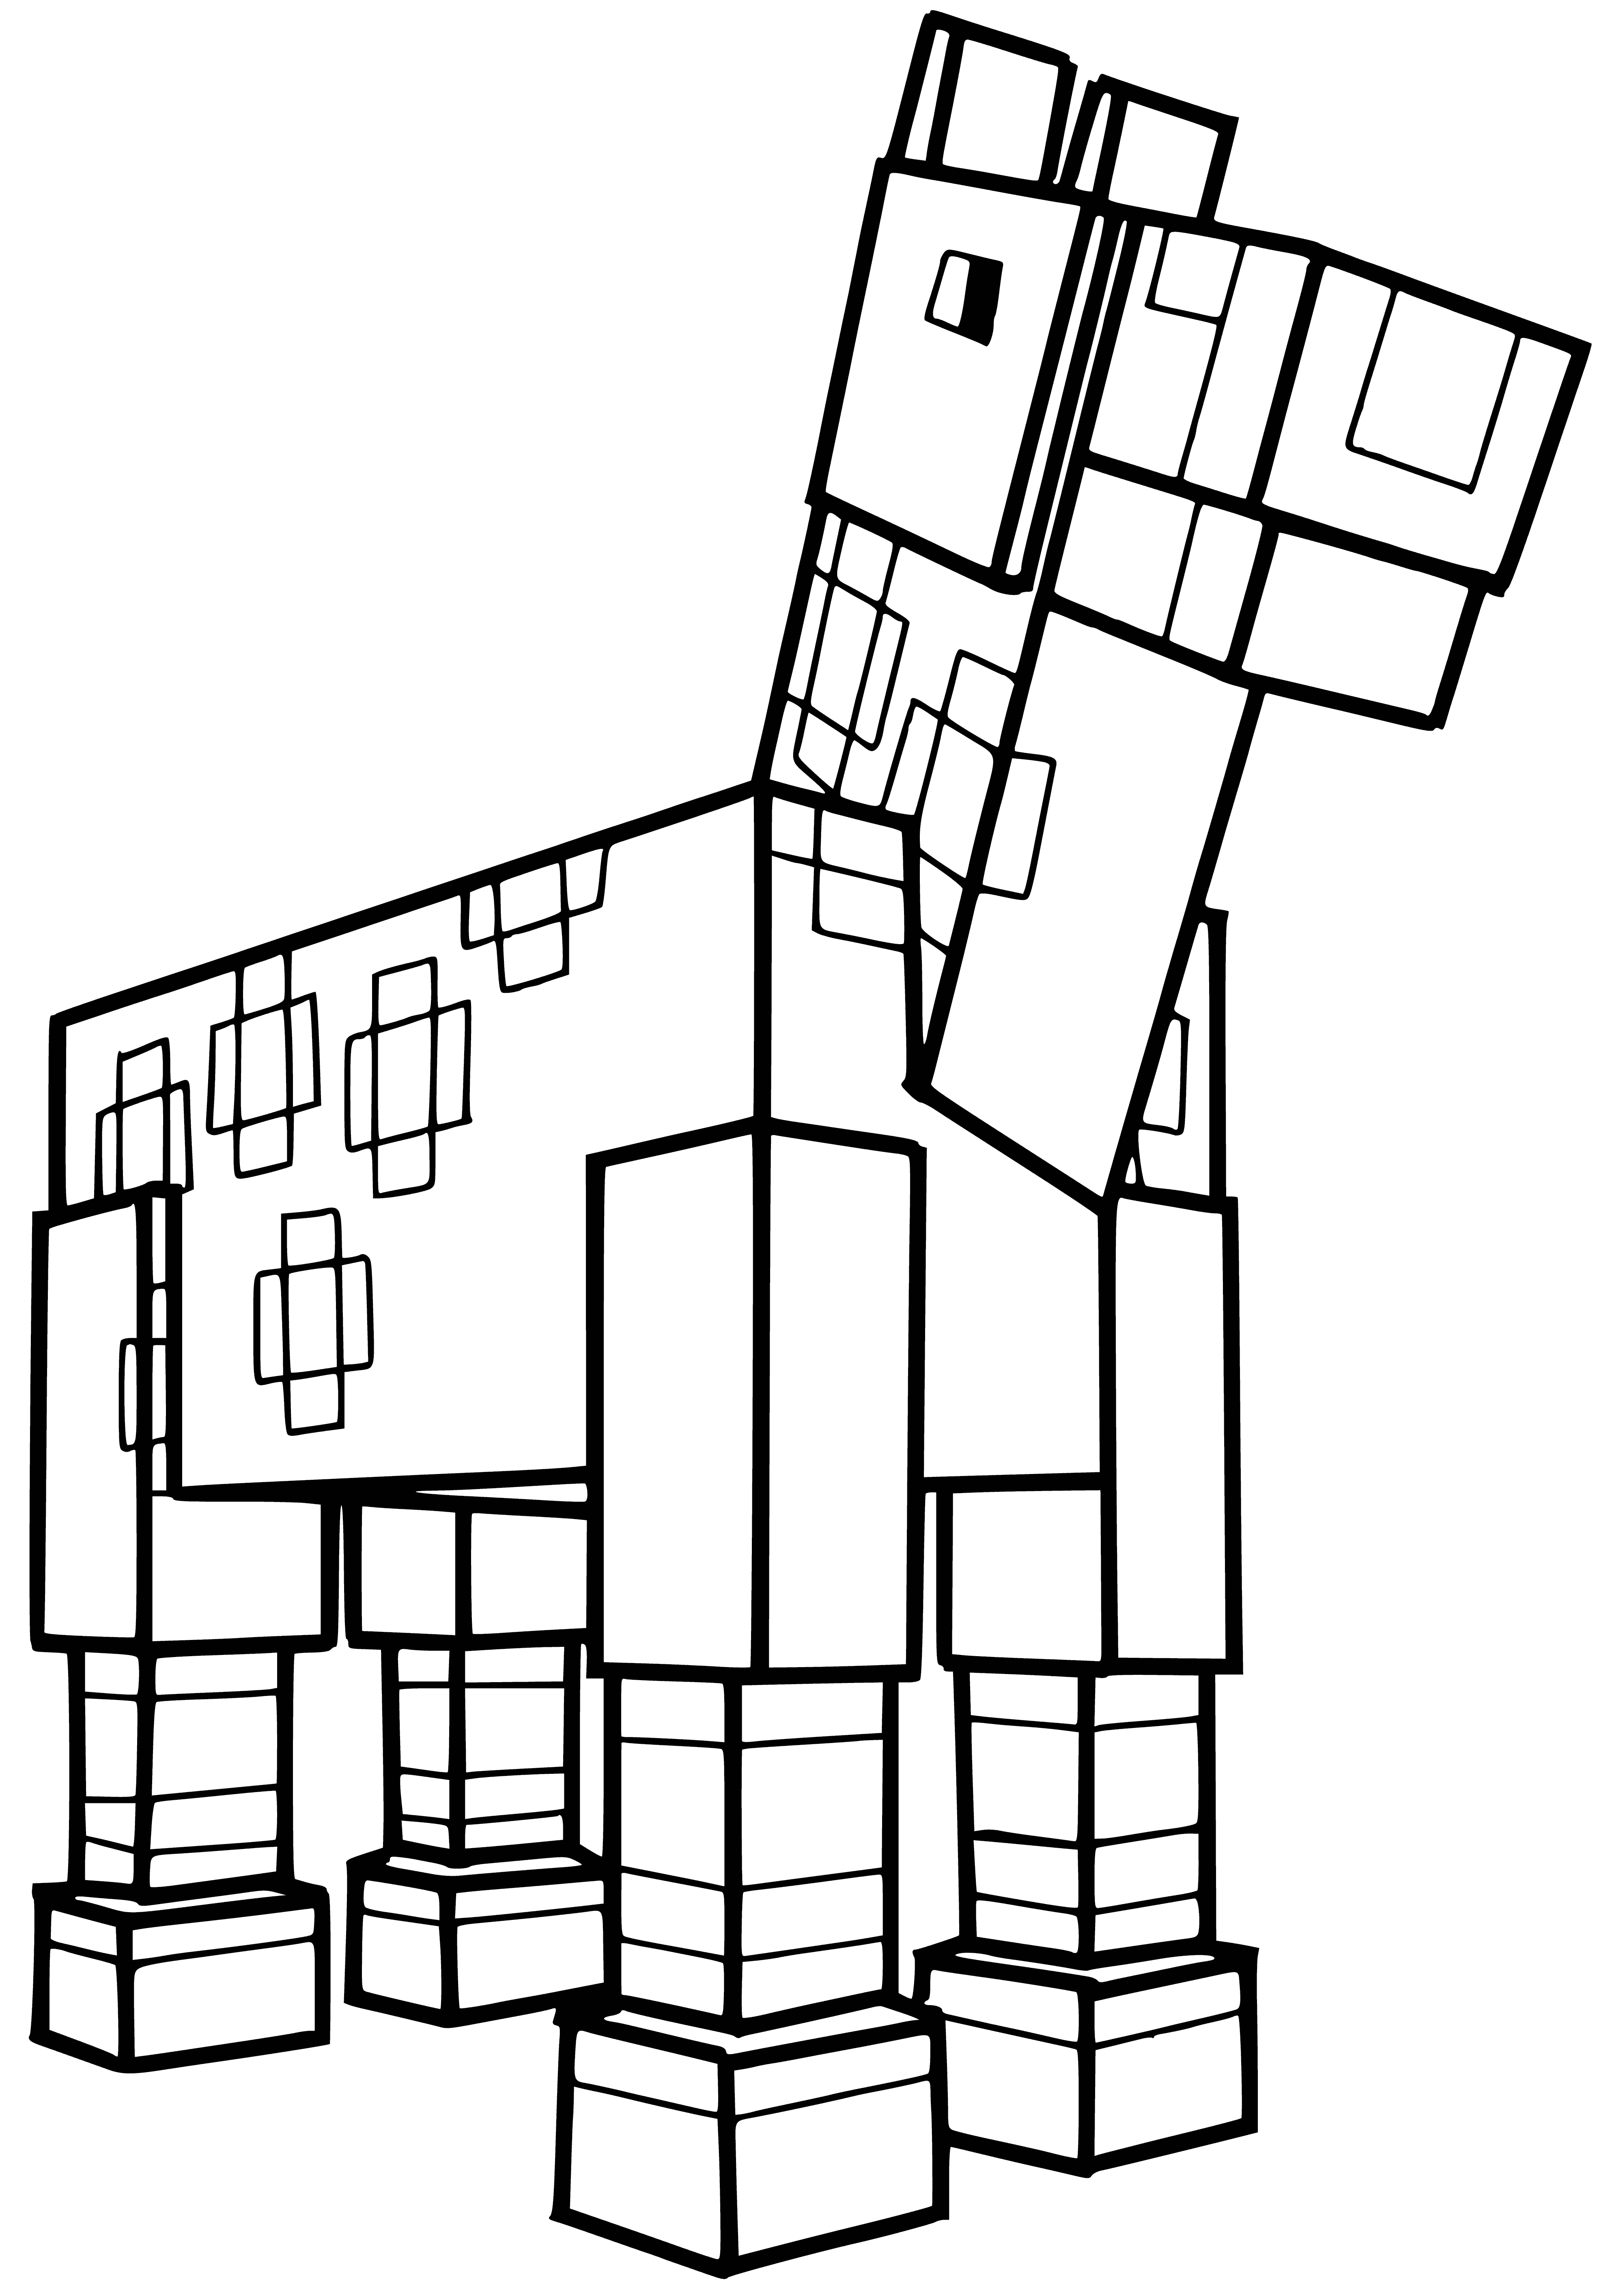 coloring page: Minecraft has a brown horse with black mane/tail, white blaze, standing in a green field.